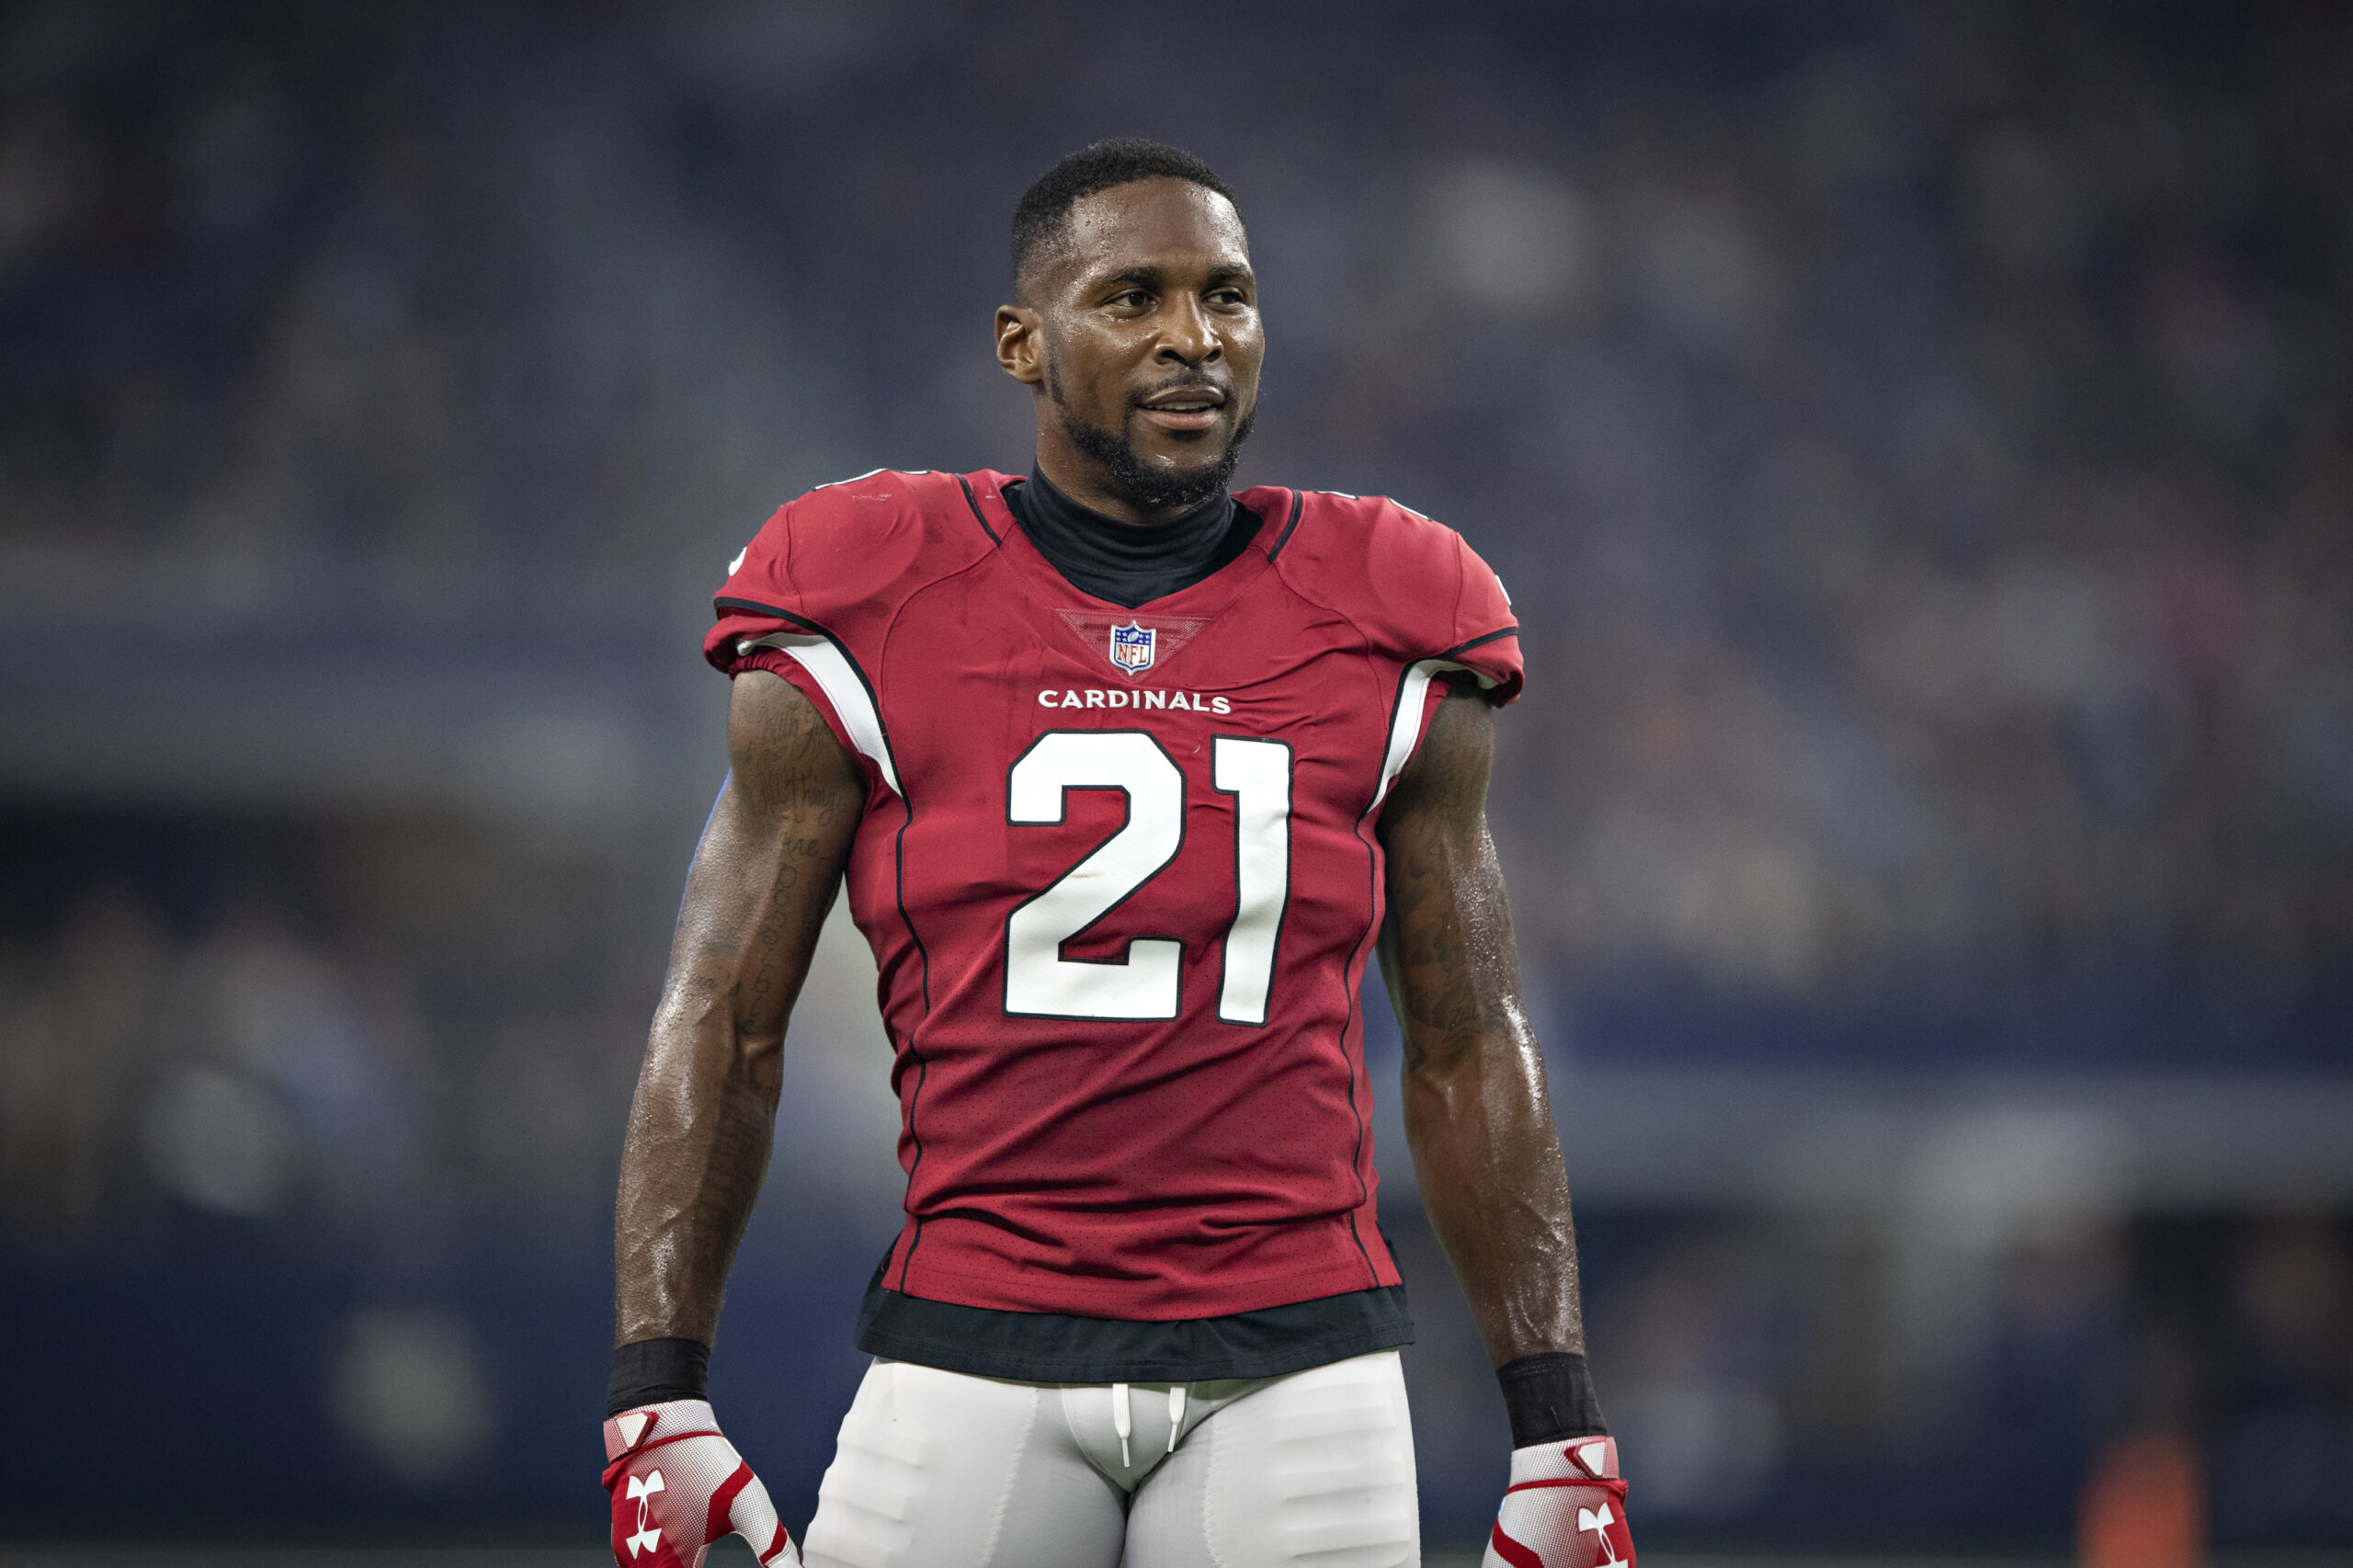 patrick-peterson-car-collection-net-worth